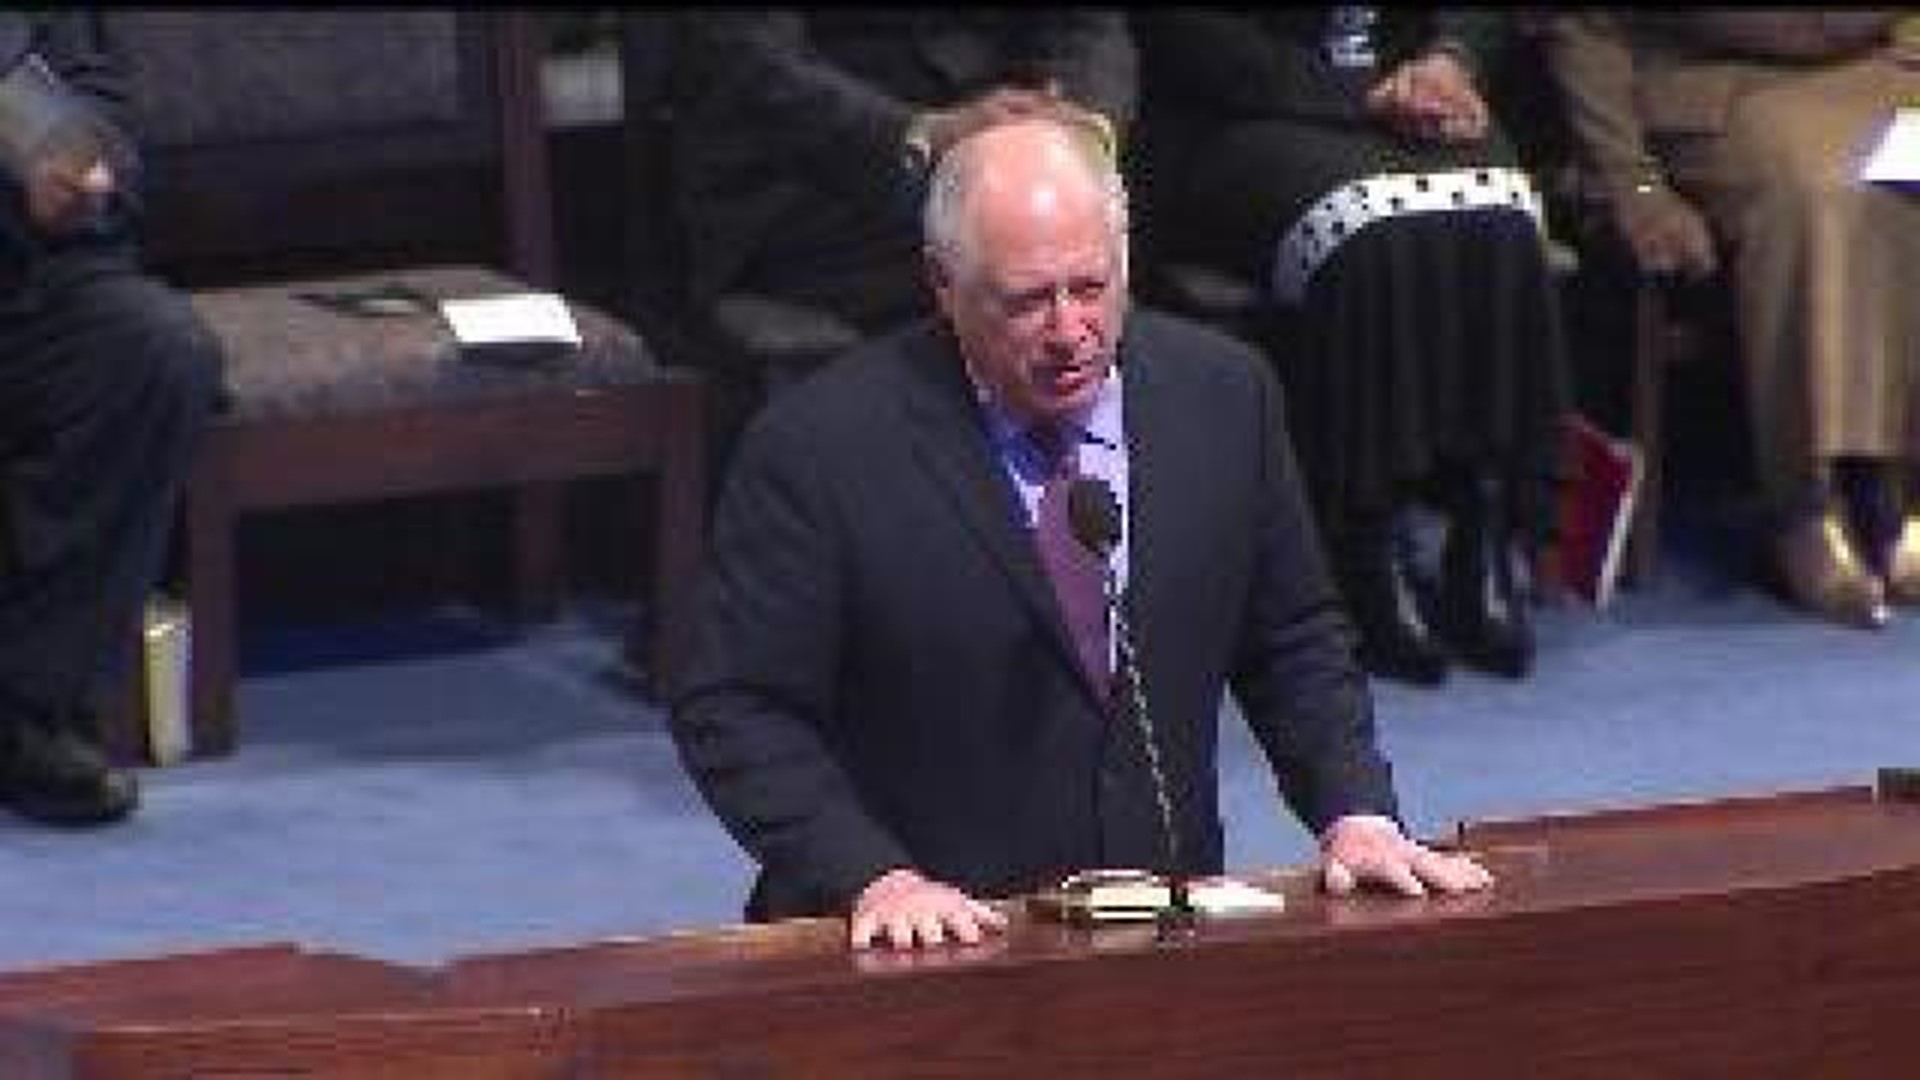 State of the State Address